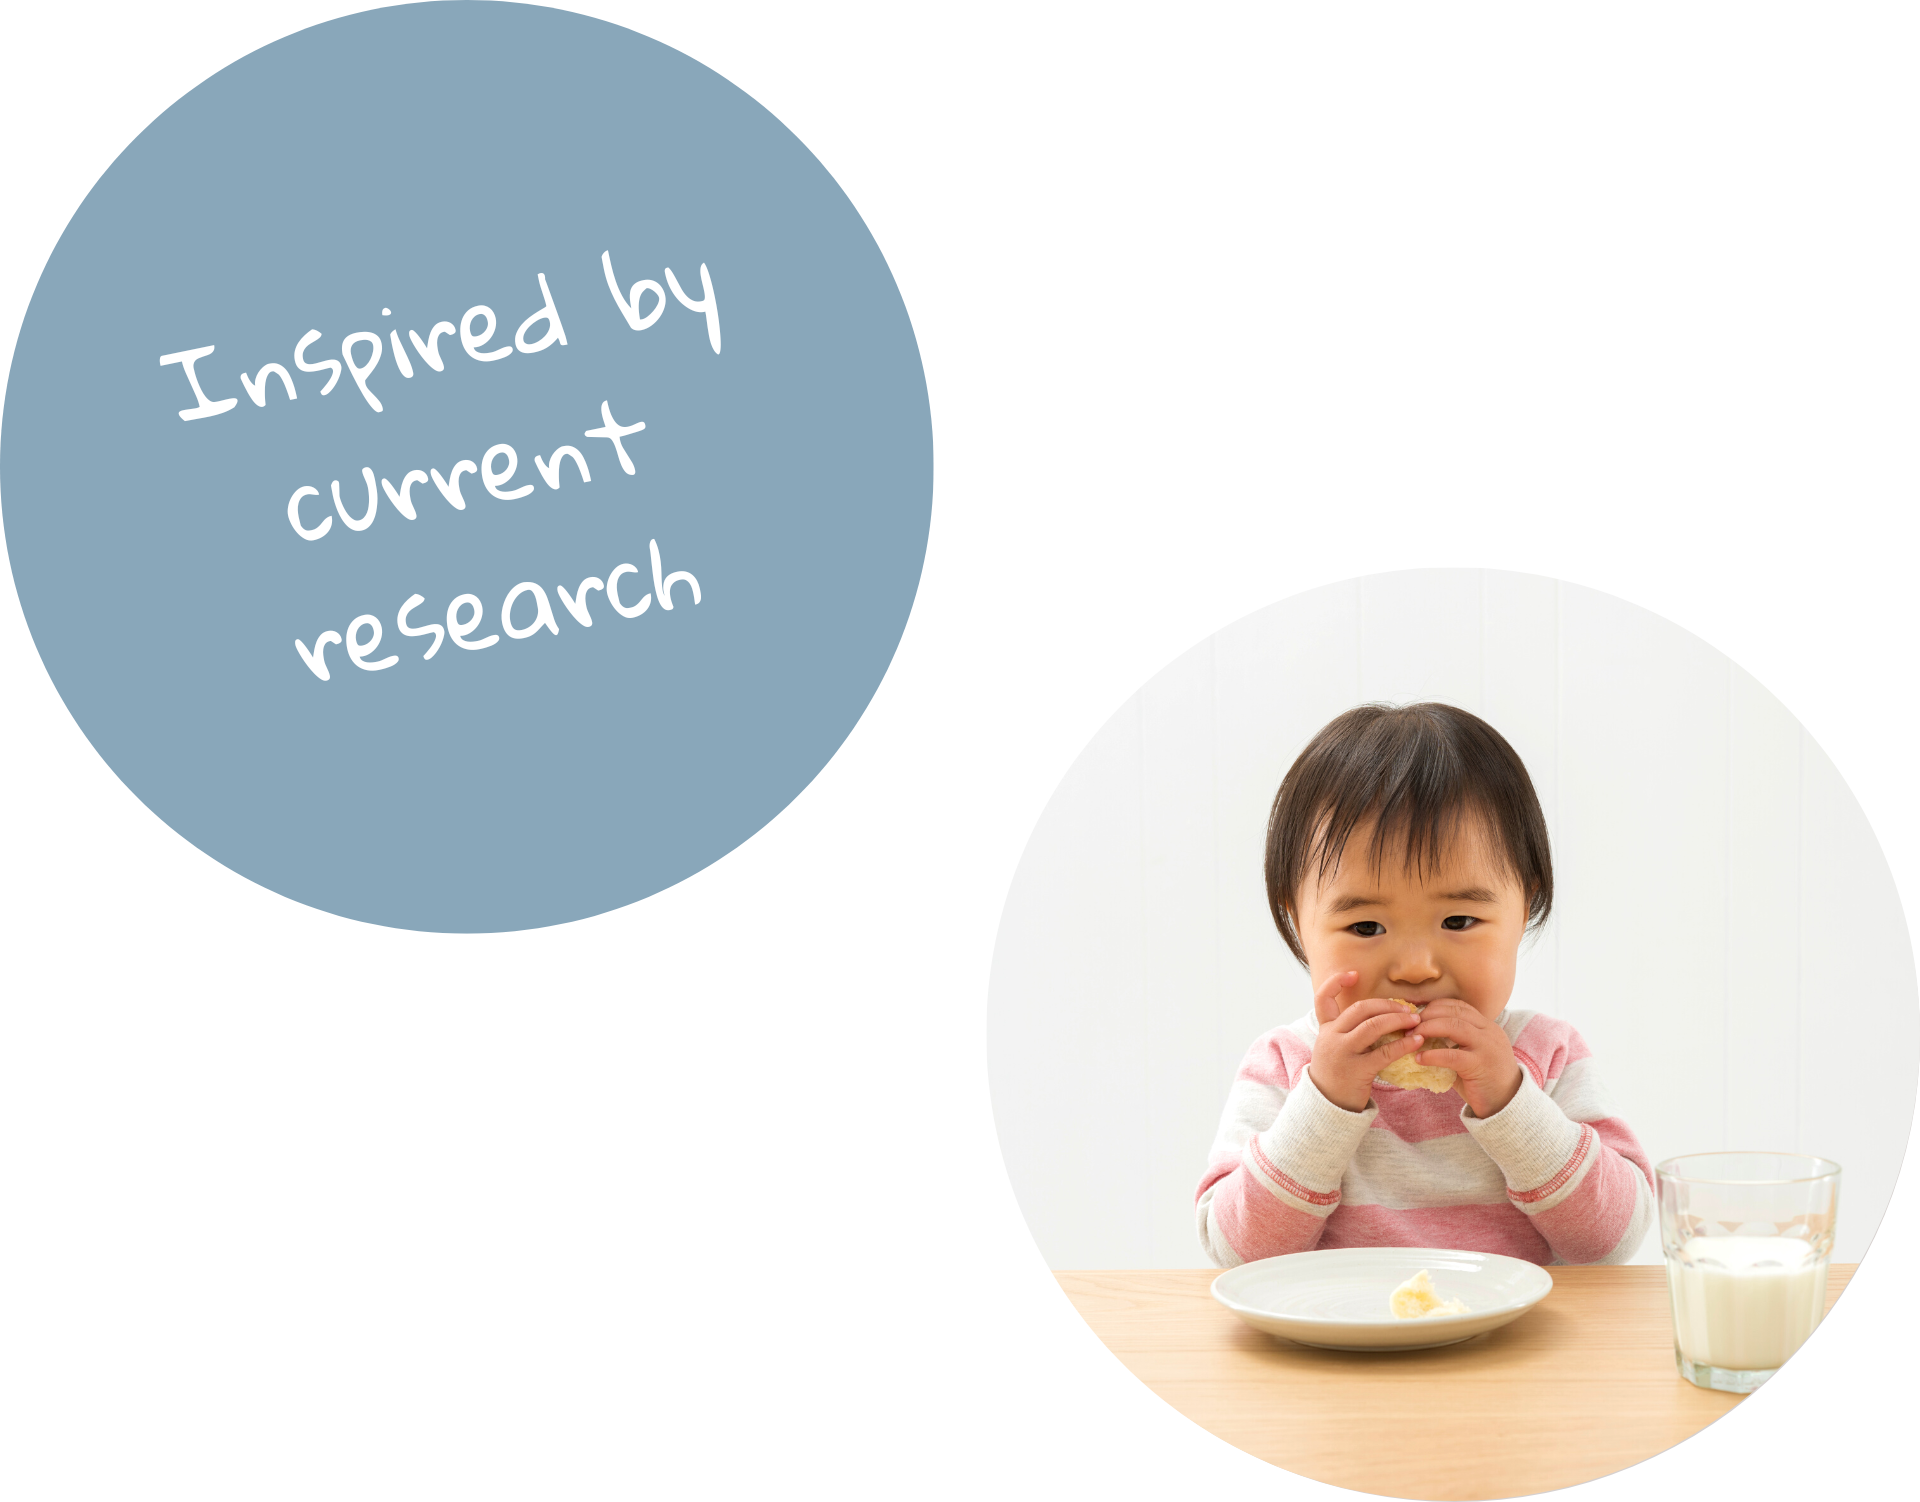 A circle photo of a baby girl eating a sandwich. She has a porcelain plate and a glass of milk in front of her on the table. Next to her, another circle image names the current website section "Inspired by current research".